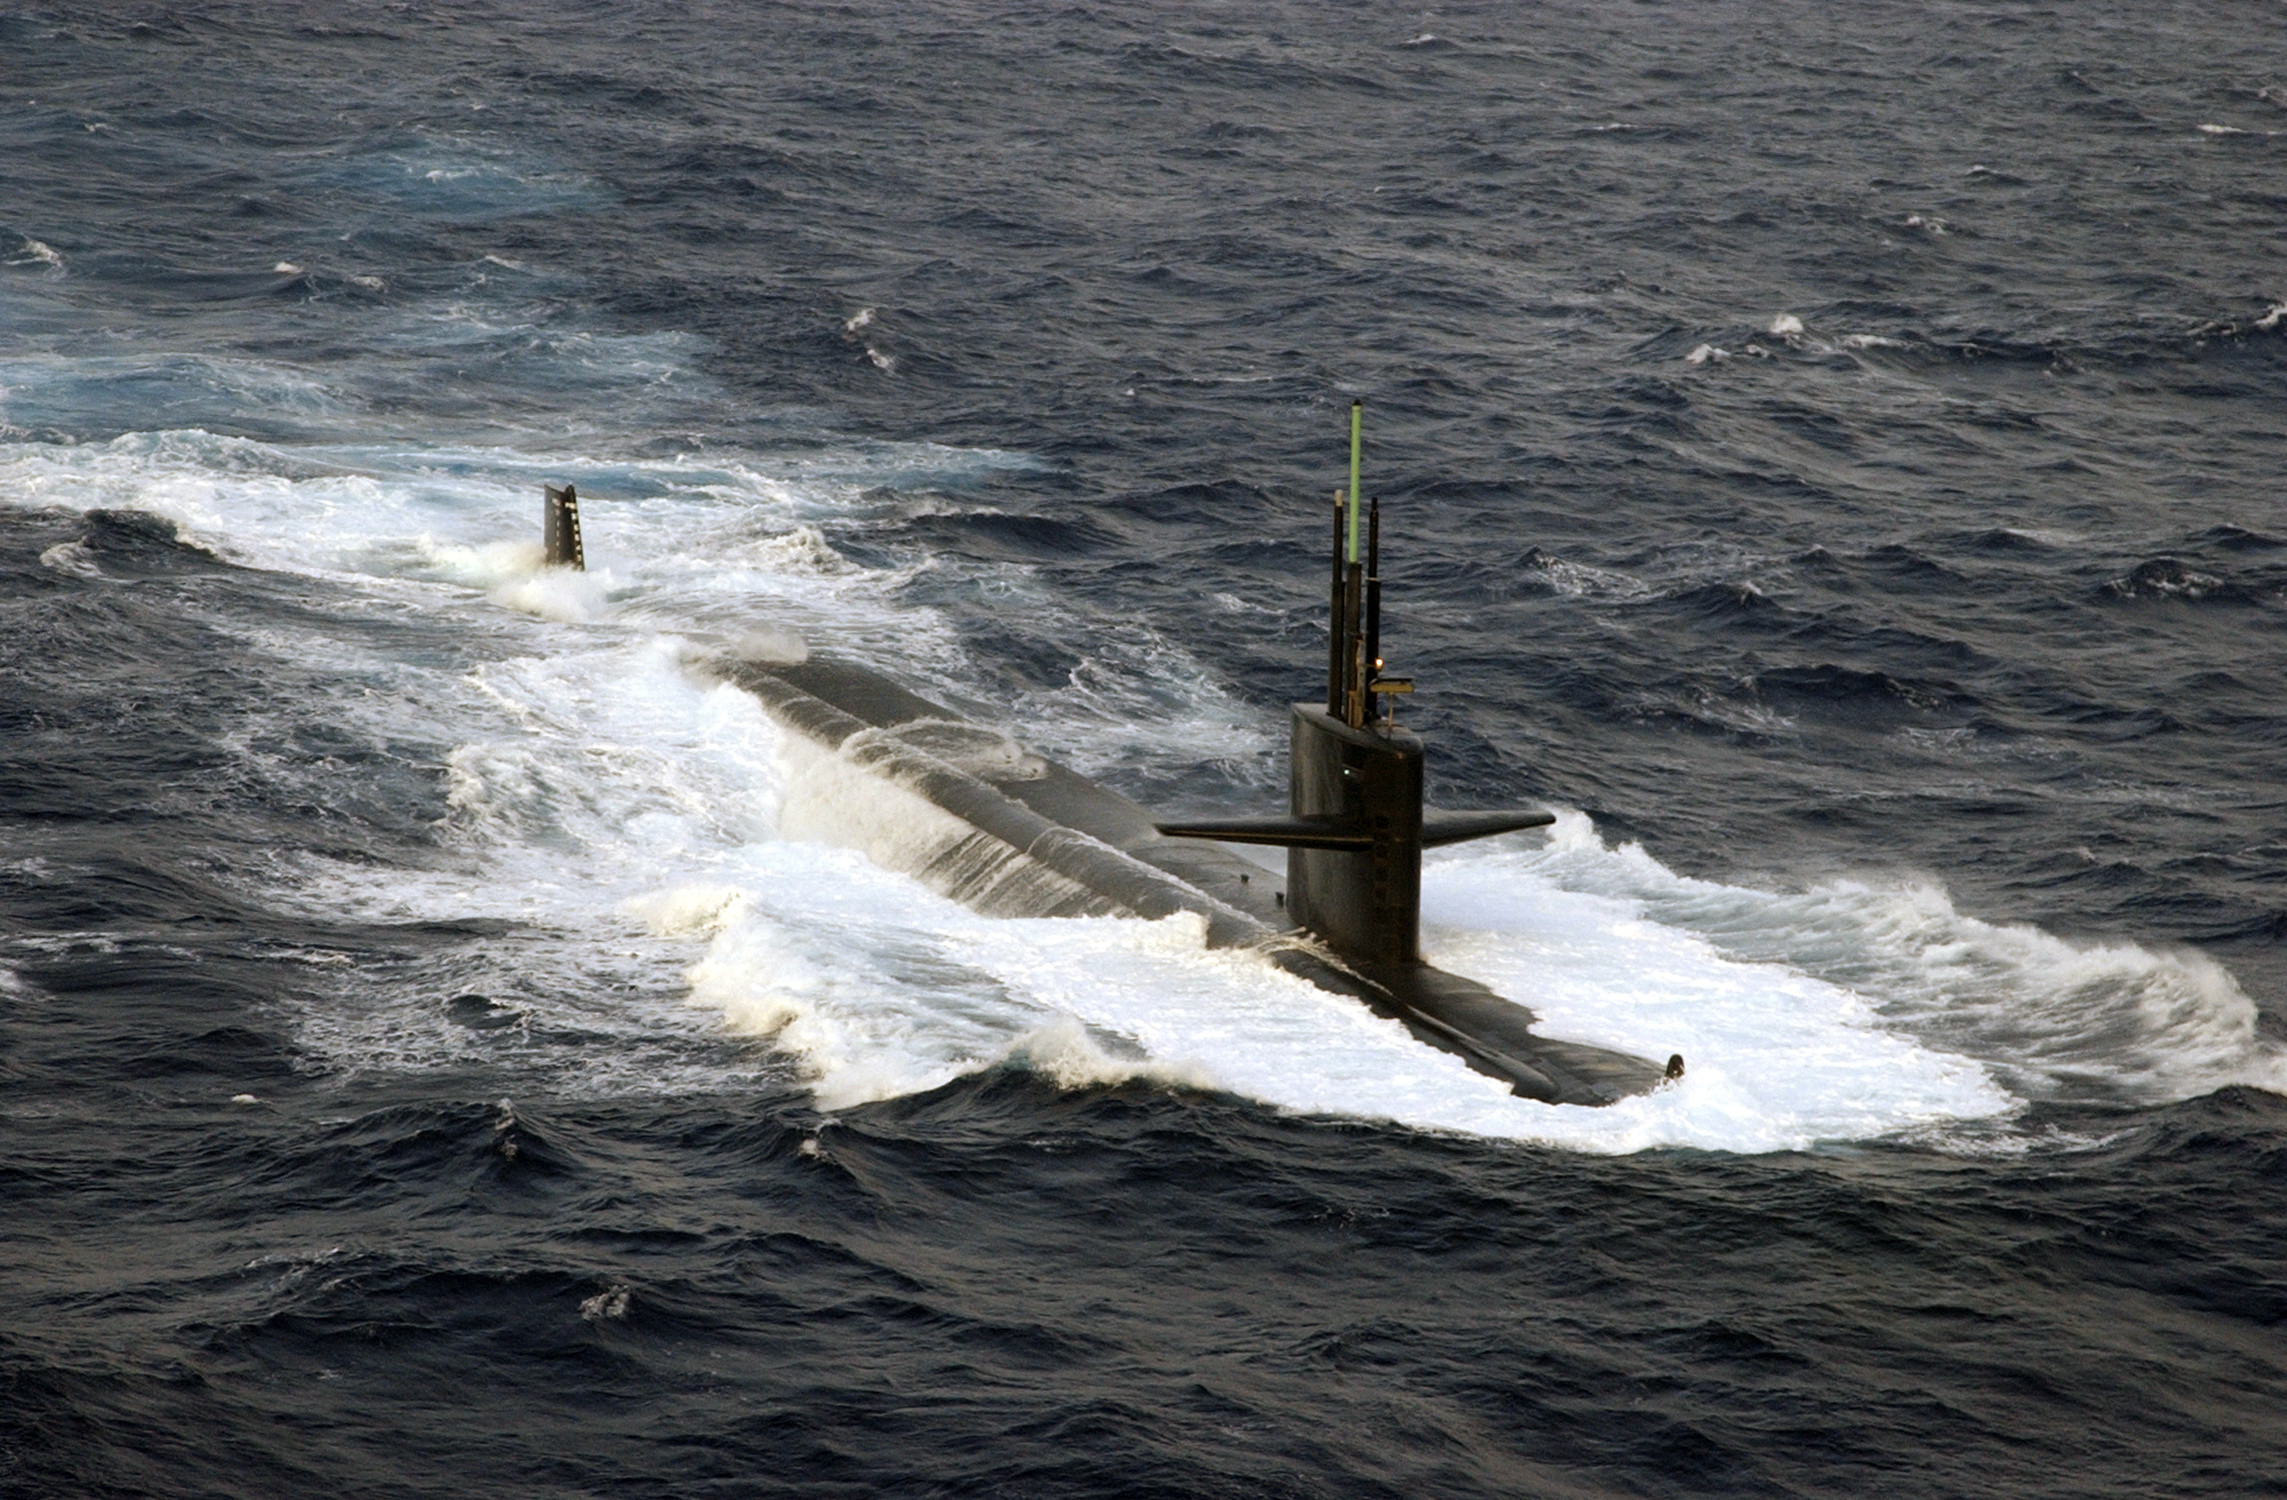 US Navy 040712-N-7748K-004 The Los Angeles-class submarine USS Albuquerque (SSN 706) surfaces in the Atlantic Ocean while participating in Majestic Eagle 2004